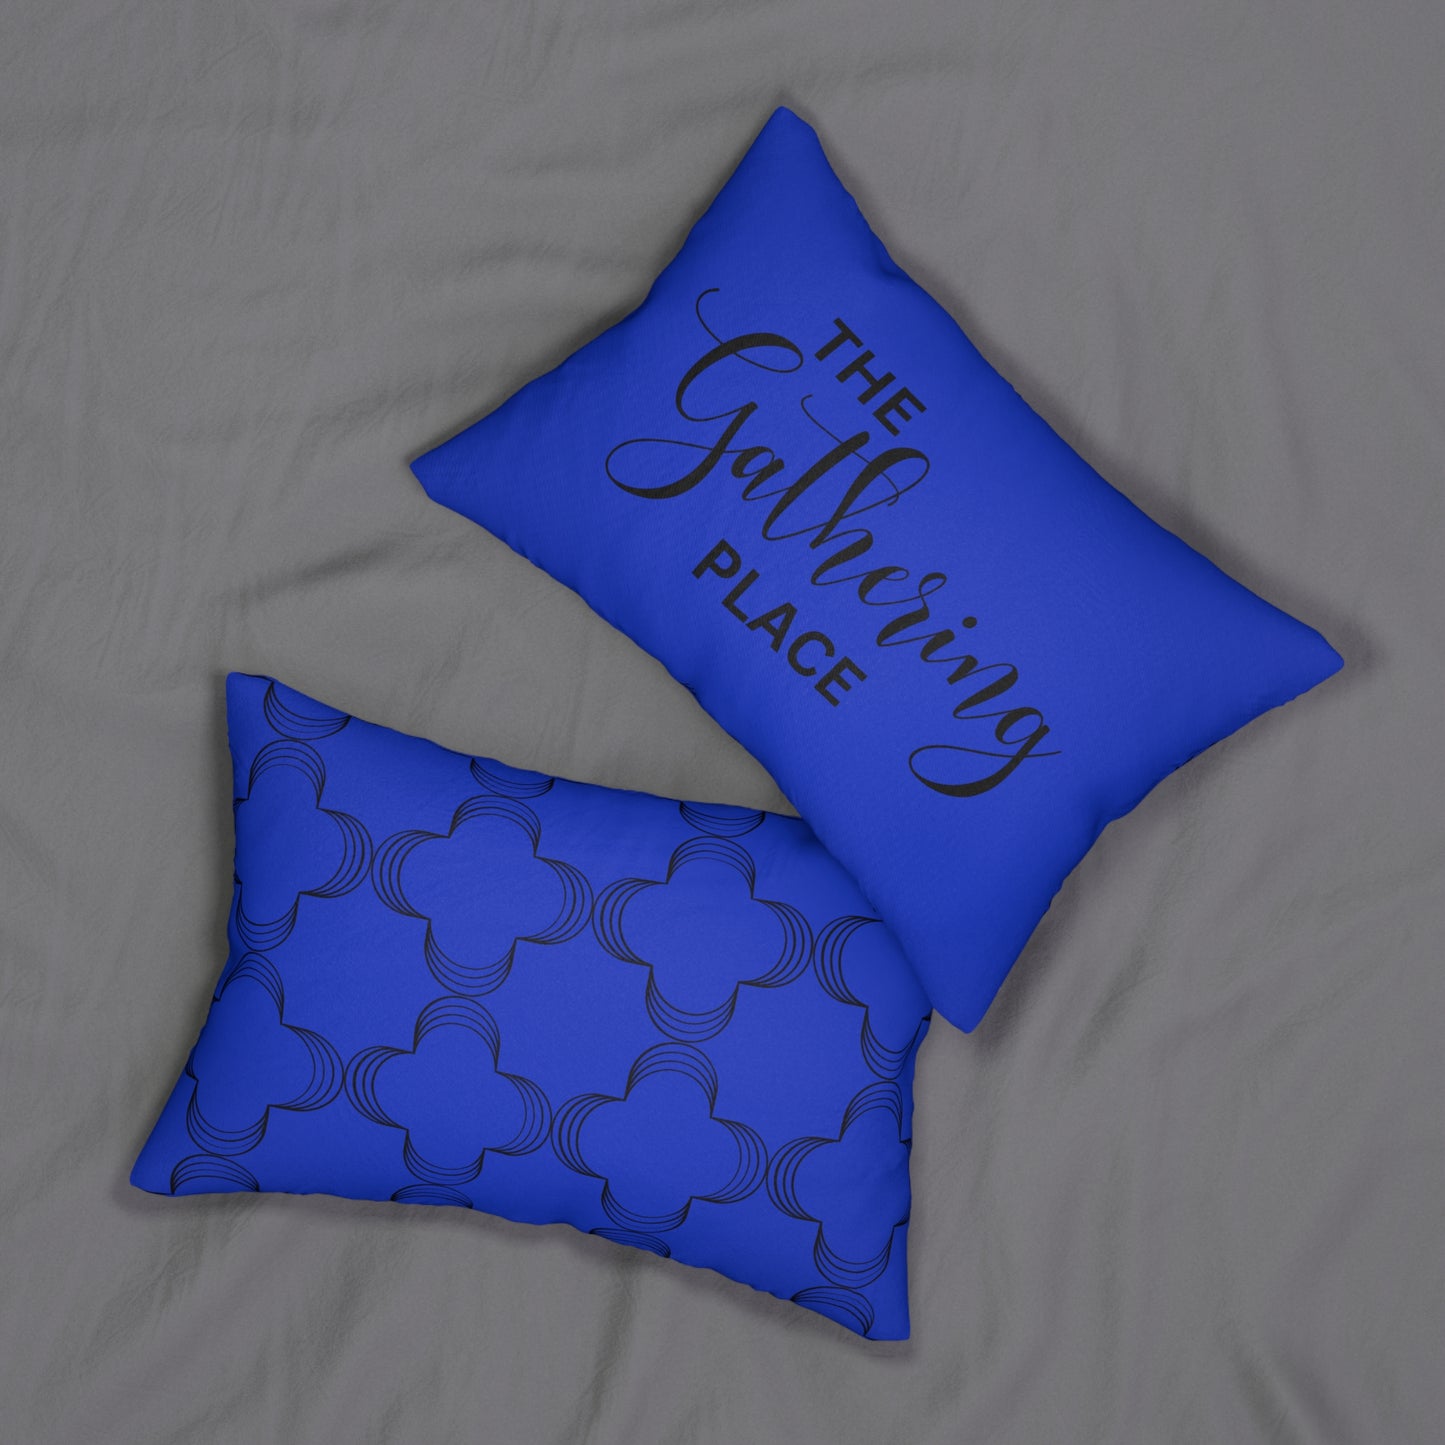 "The Gathering Place" Geometric Accent Pillow